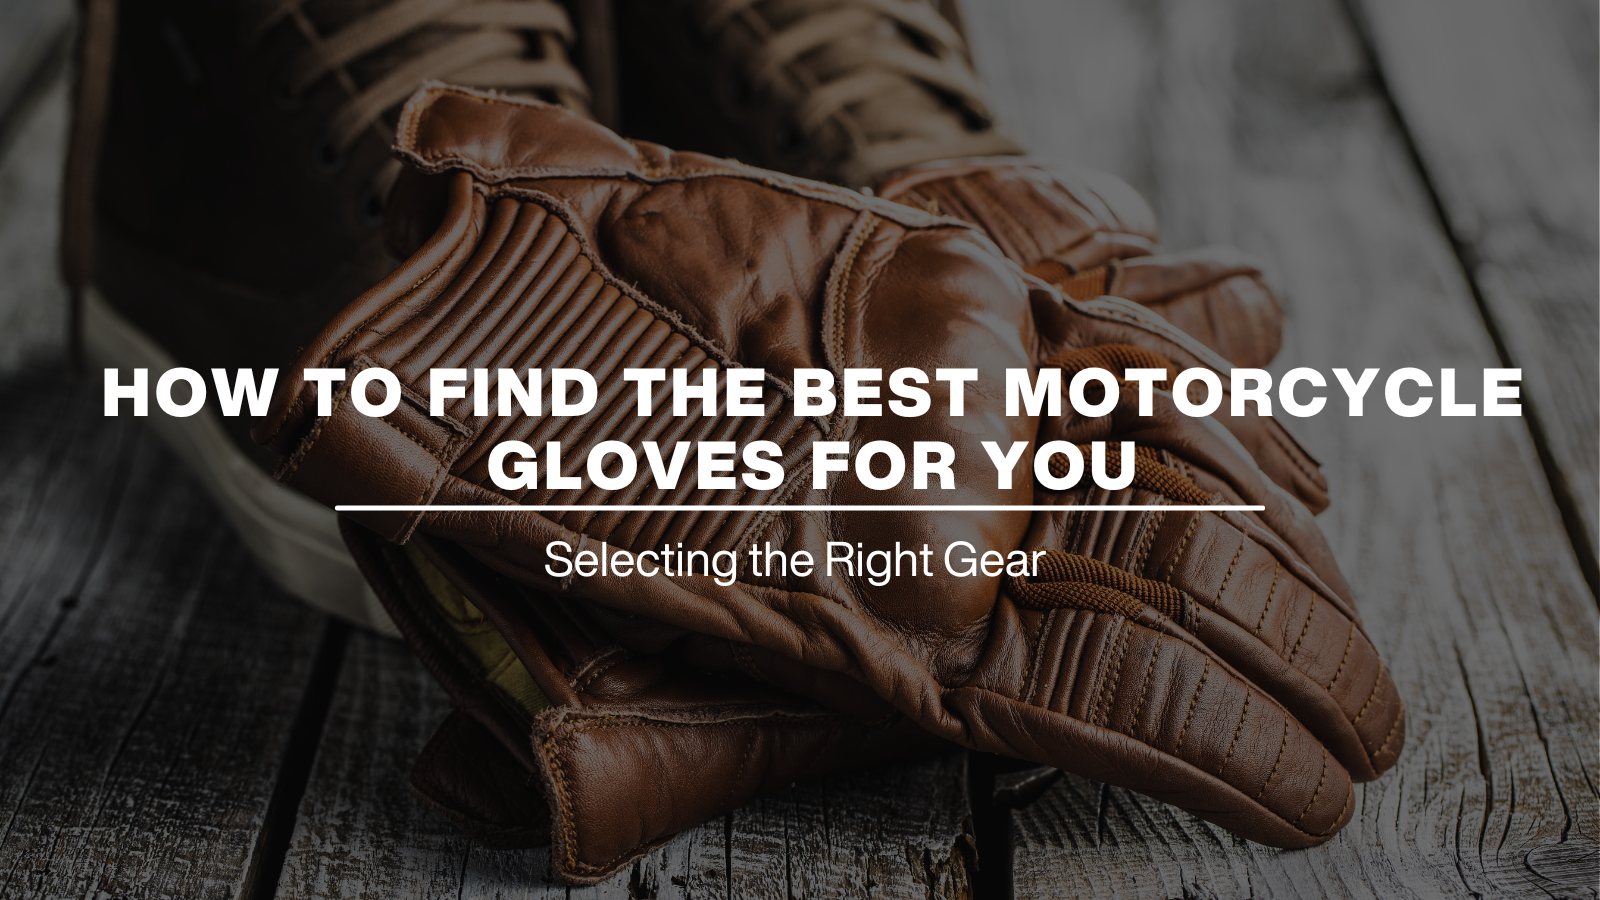 HOW TO FIND THE BEST MOTORCYCLE GLOVES FOR YOU